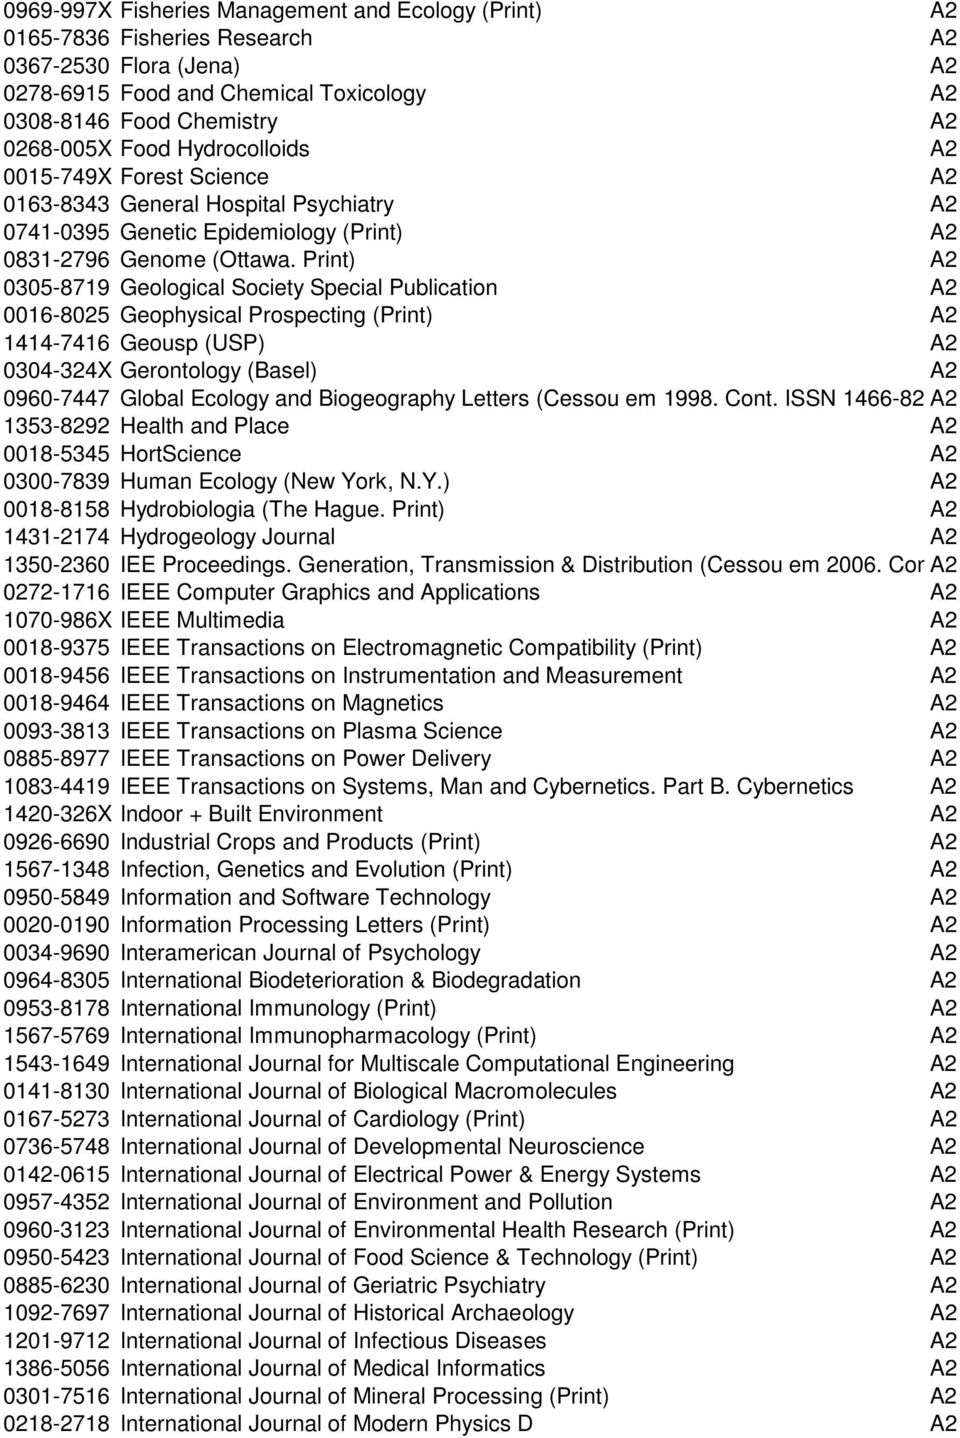 Print) A2 0305-8719 Geological Society Special Publication A2 0016-8025 Geophysical Prospecting (Print) A2 1414-7416 Geousp (USP) A2 0304-324X Gerontology (Basel) A2 0960-7447 Global Ecology and